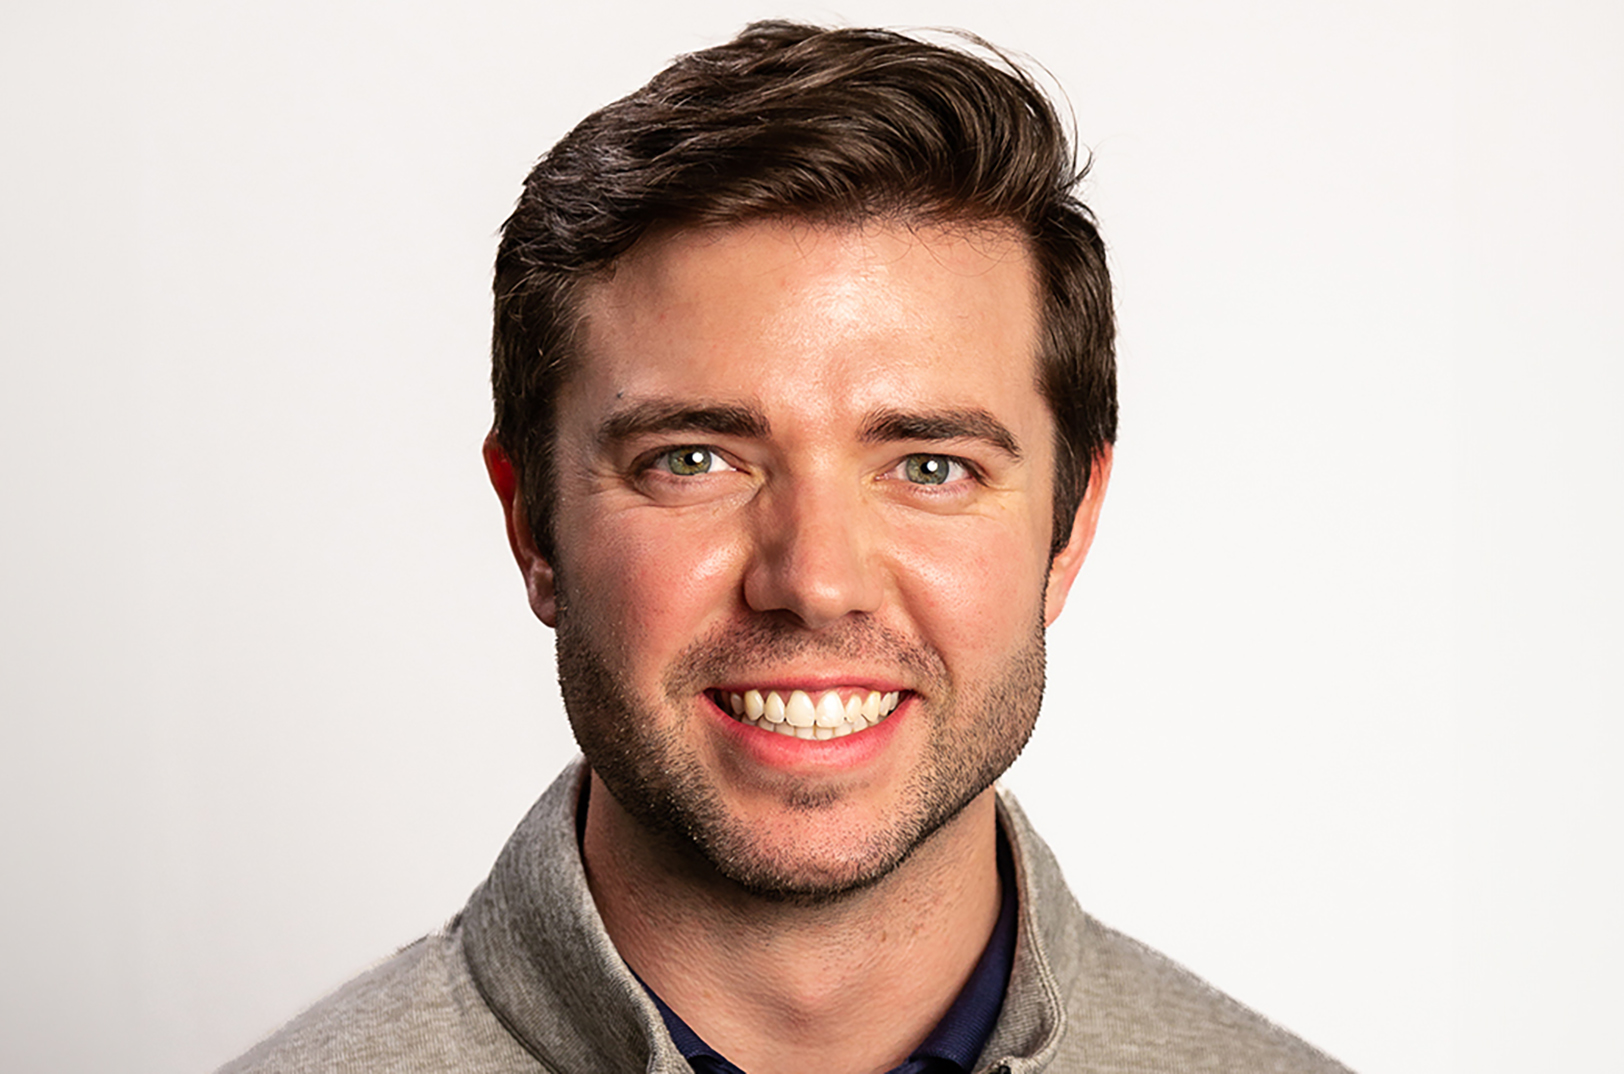 Sports tech founder: Team’s years of work laid groundwork for Forbes 30 Under 30 honor